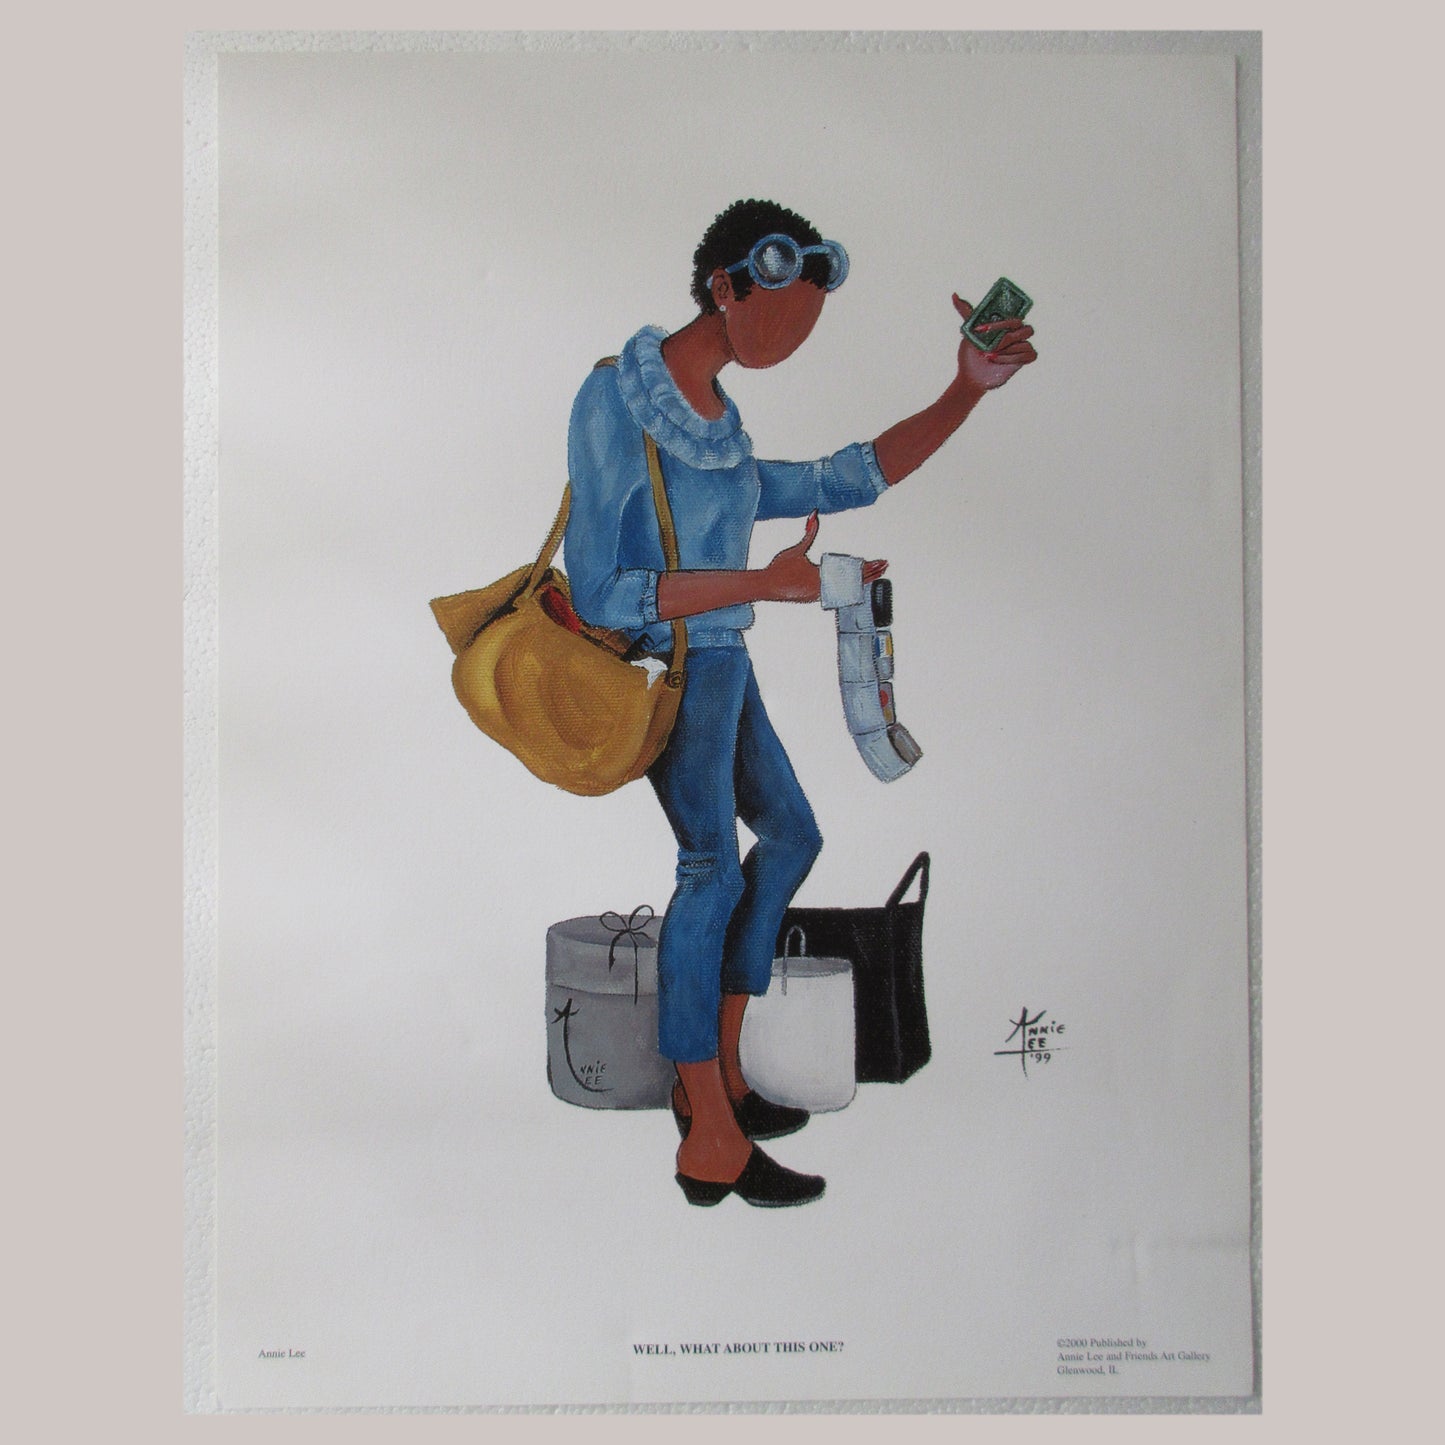 Well, What About This One? Unframed Art Print Annie Lee